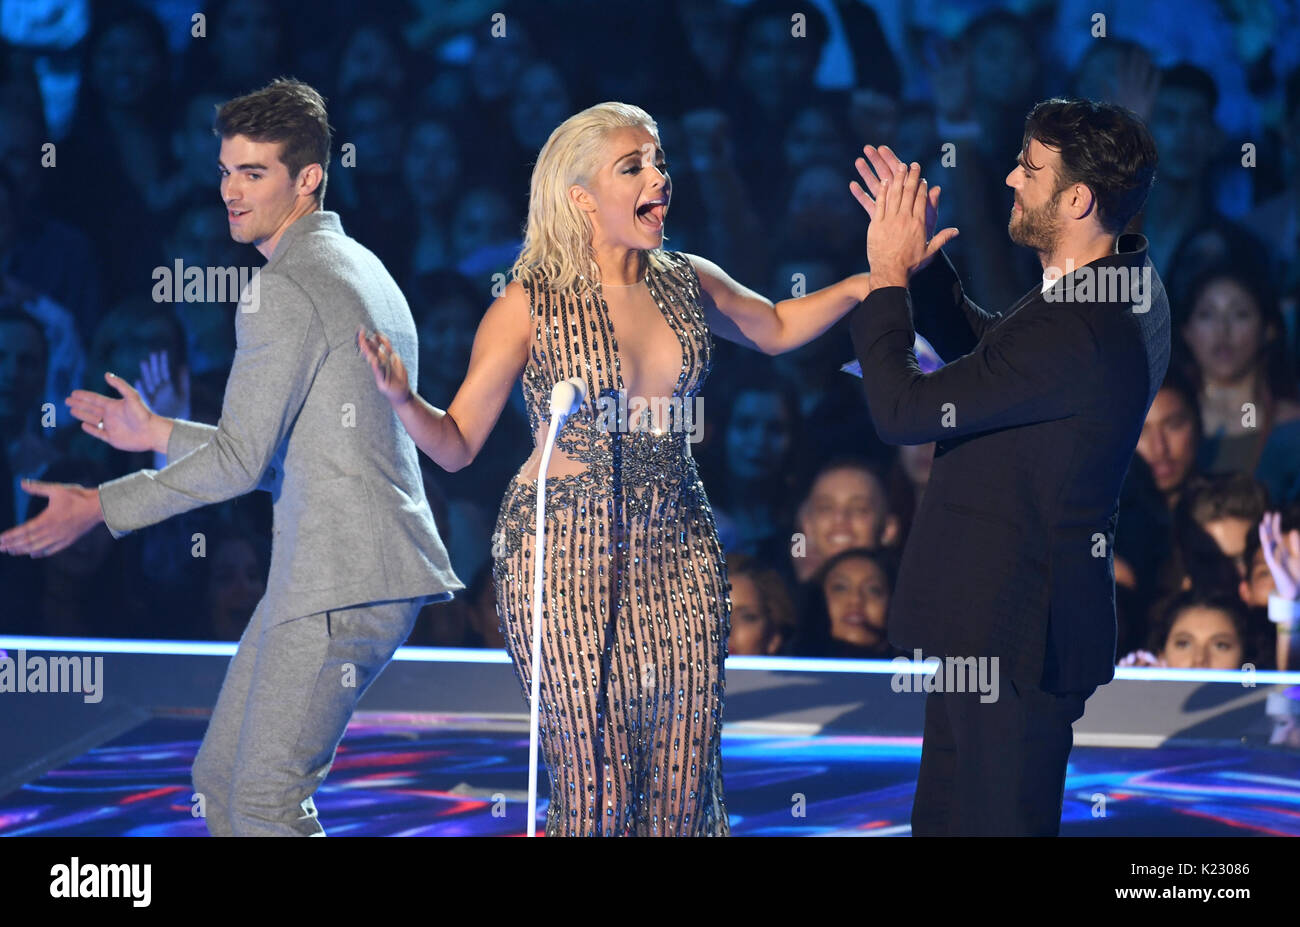 Bebe Rexha and The Chainsmokers presenting on stage during the 2017 MTV Video Music Awards held at The Forum in Los Angeles, USA. Stock Photo